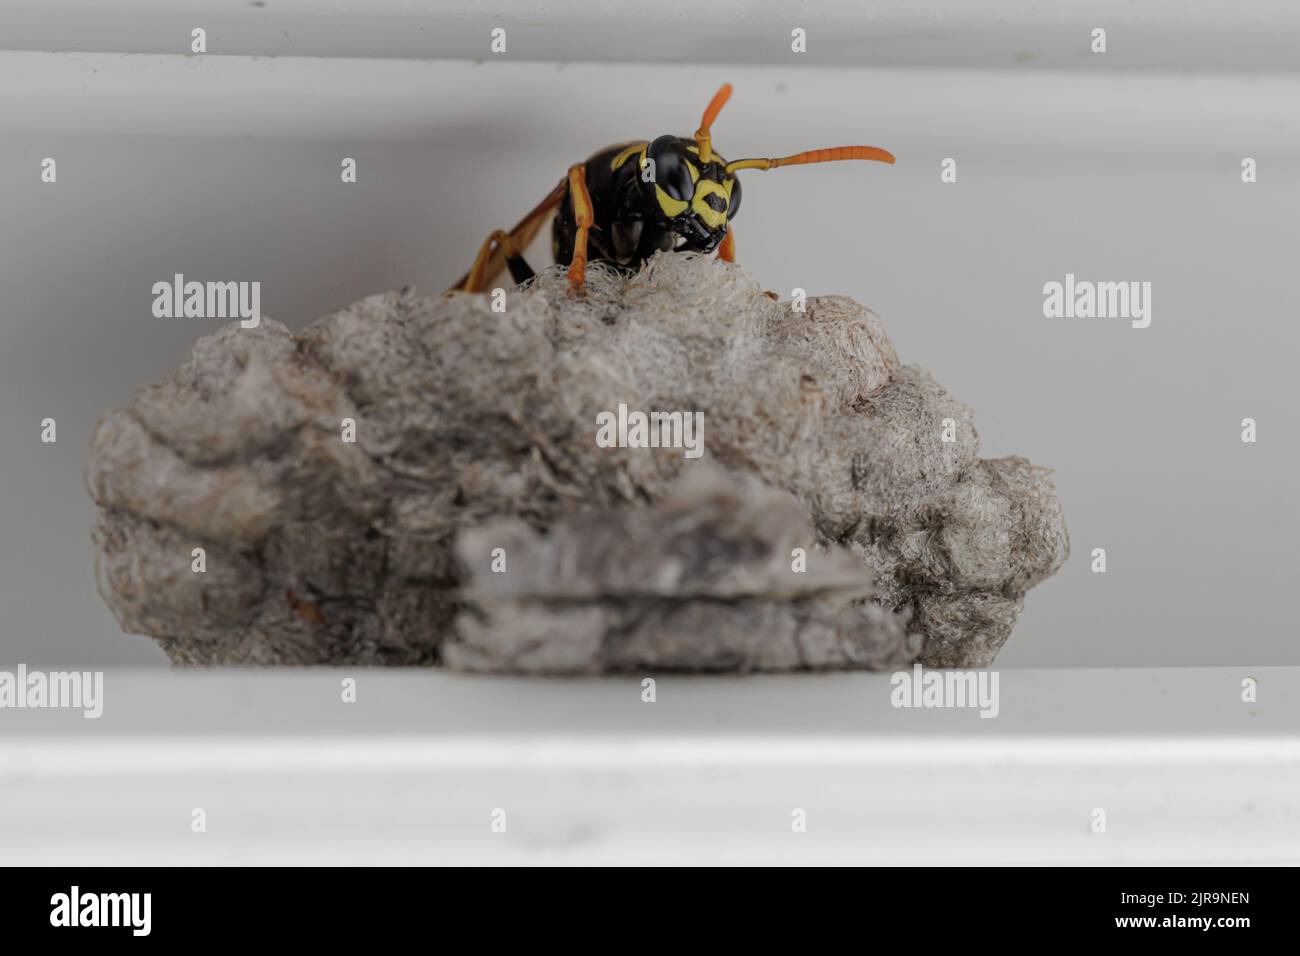 A wasp building a paper nest at urban place Stock Photo